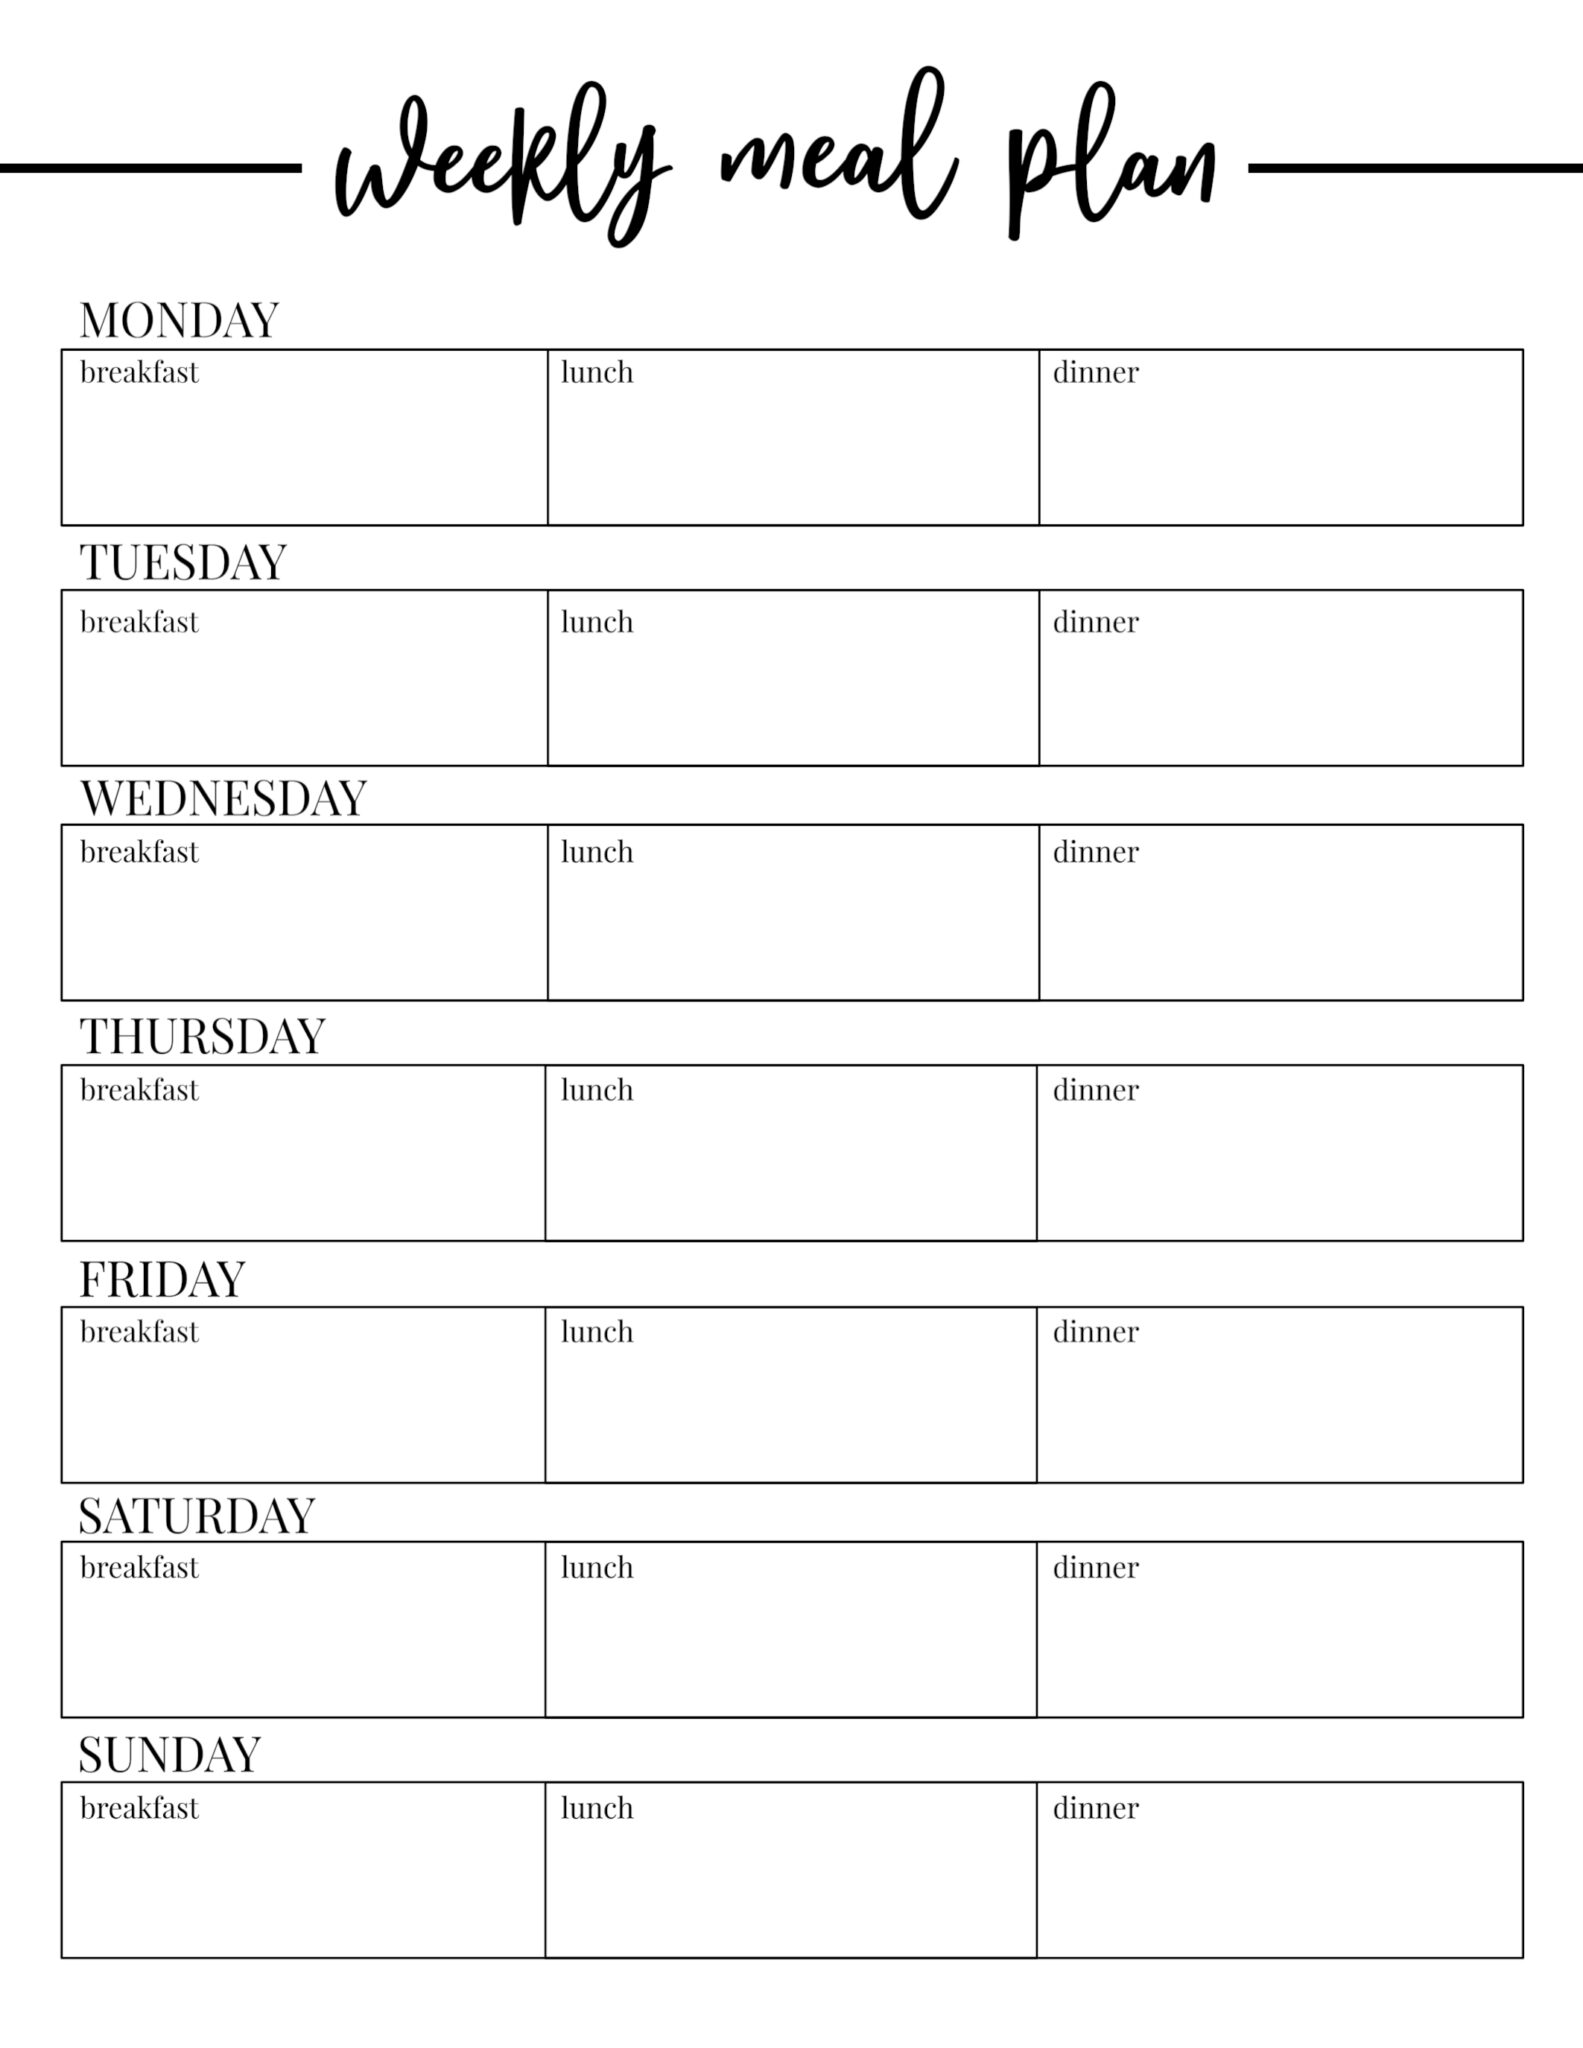 free weekly meal planning sheet